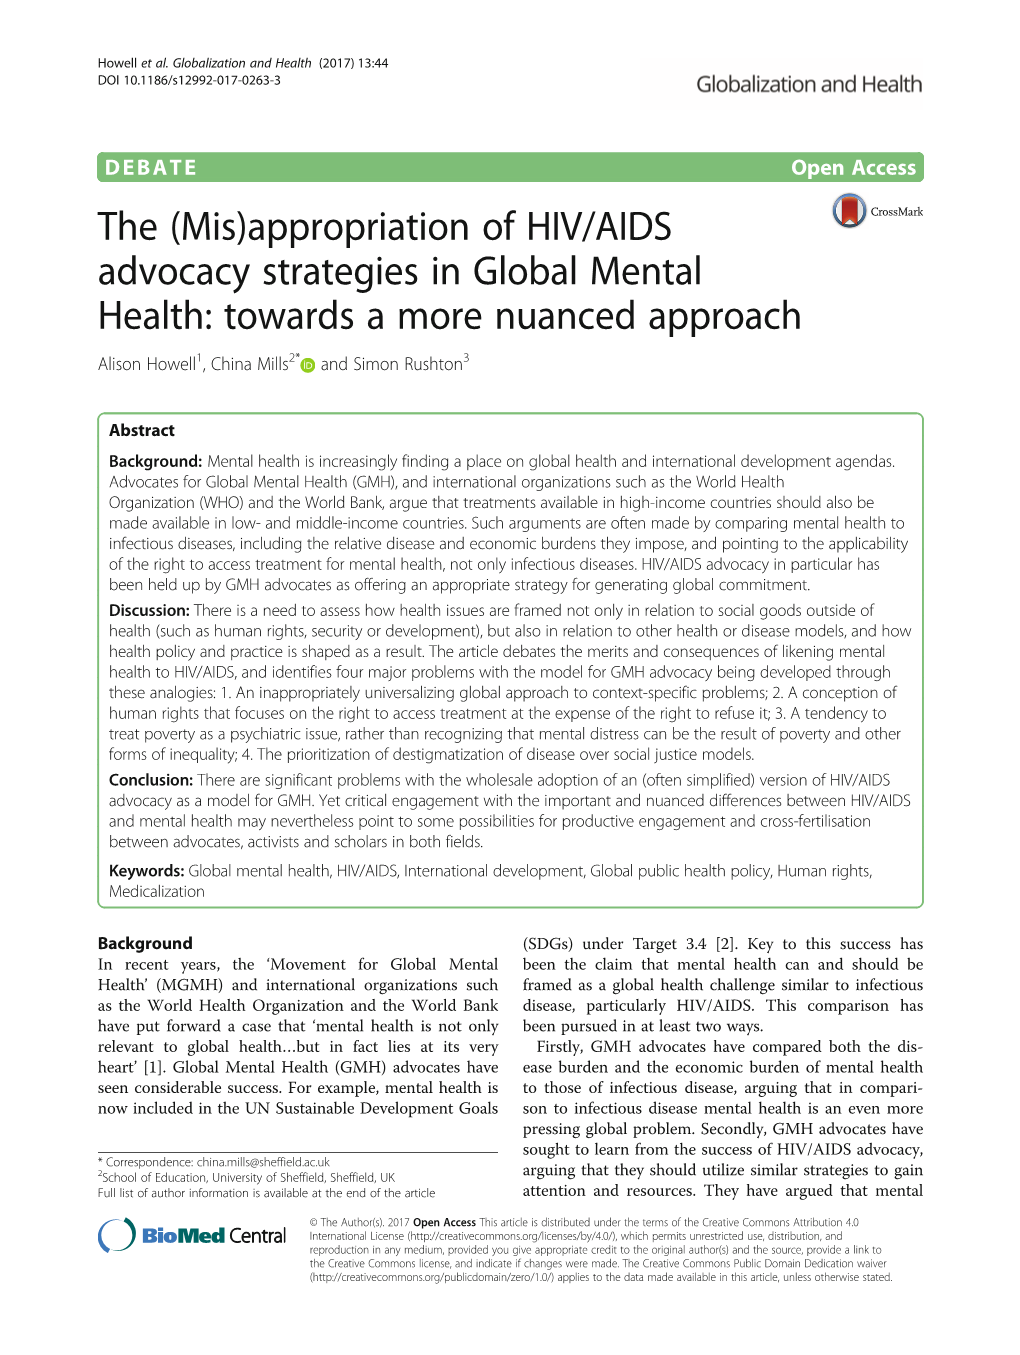 Appropriation of HIV/AIDS Advocacy Strategies in Global Mental Health: Towards a More Nuanced Approach Alison Howell1, China Mills2* and Simon Rushton3